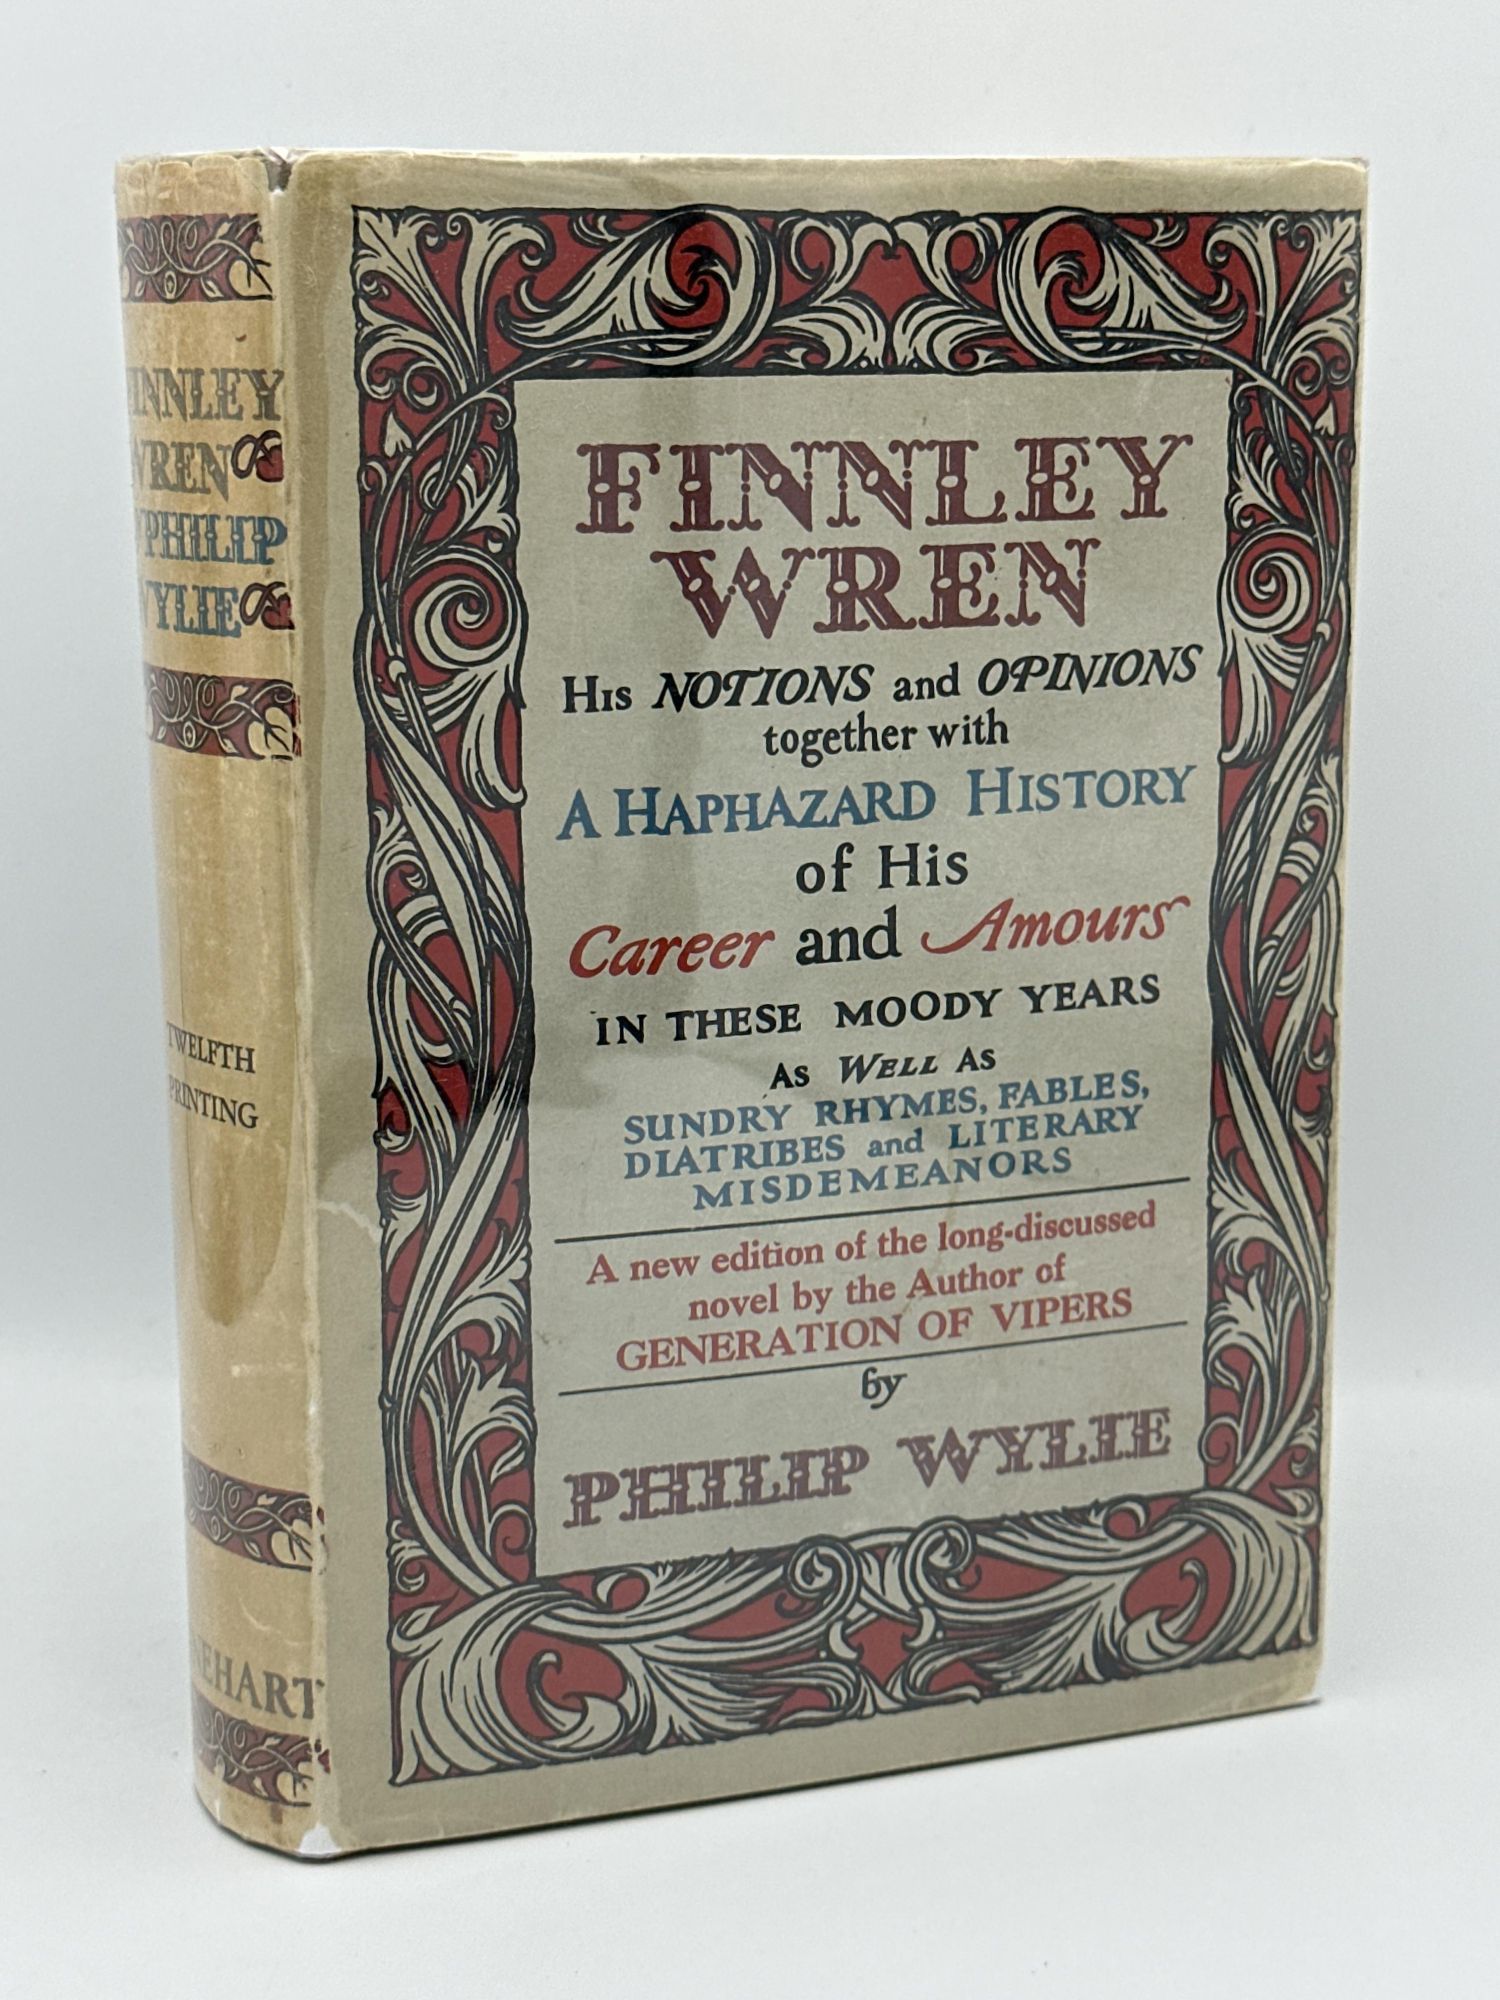 Finnley Wren, His Notions and Opinions together with a Haphazard History of His Career and Amours. Phillp Wylie.